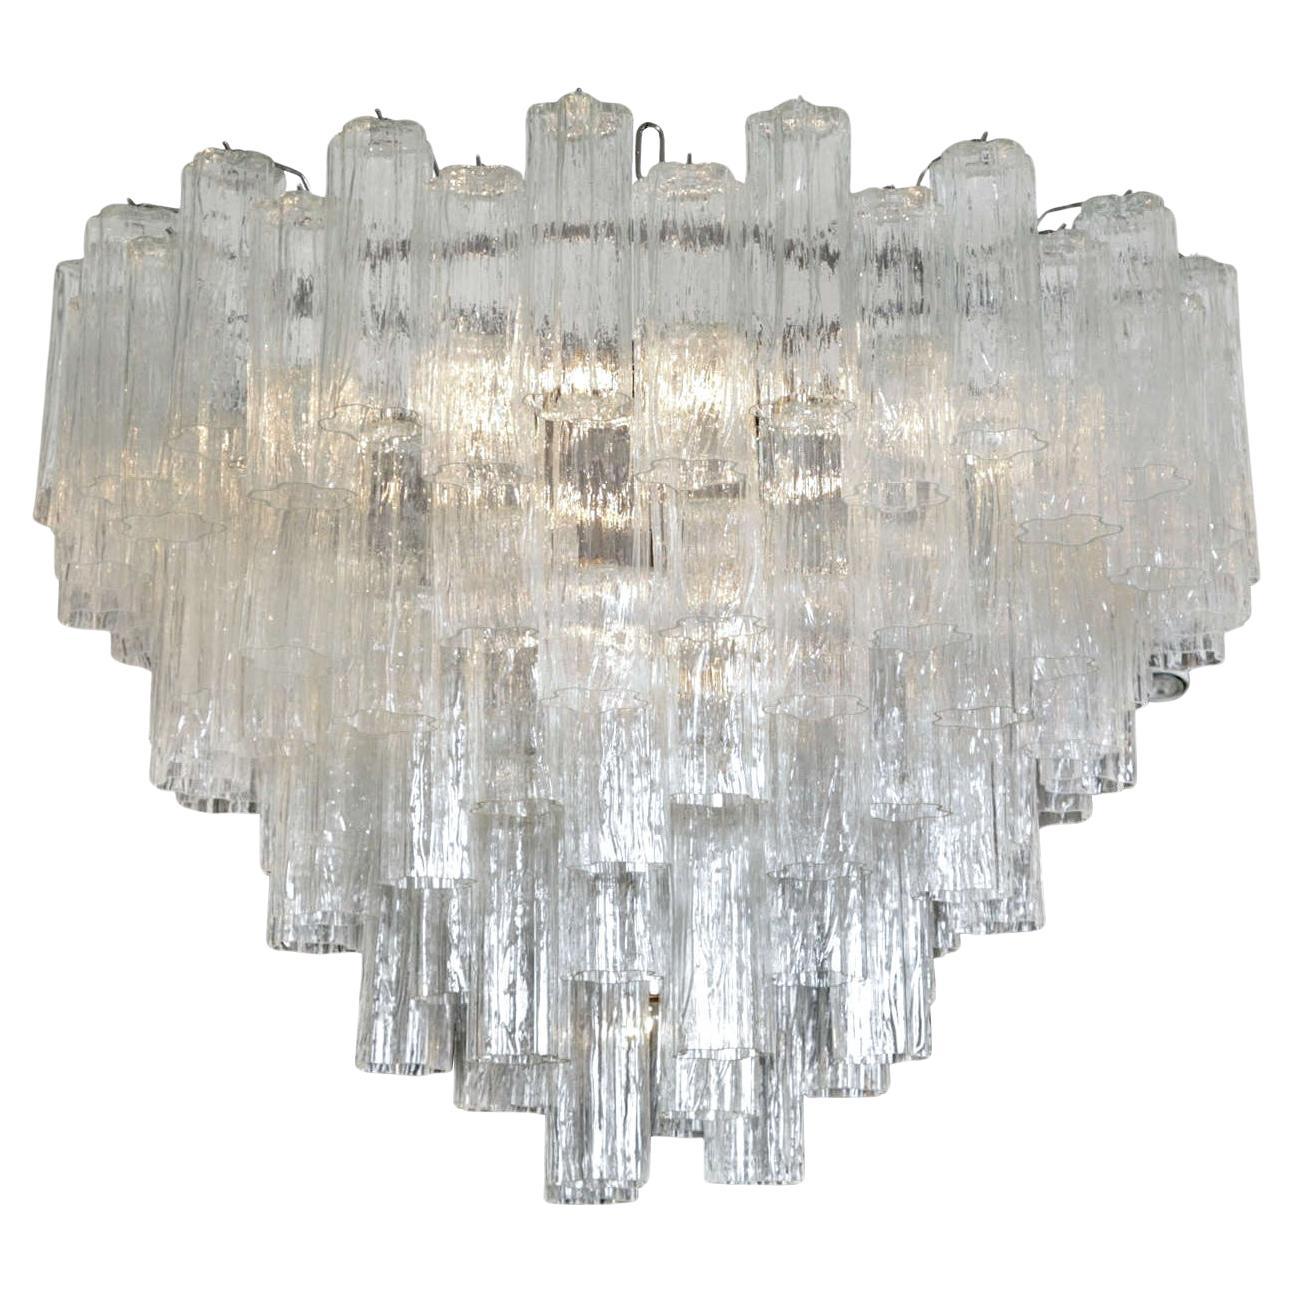 Large Italian clear glass cylinder 'Claridge's' Chandelier For Sale